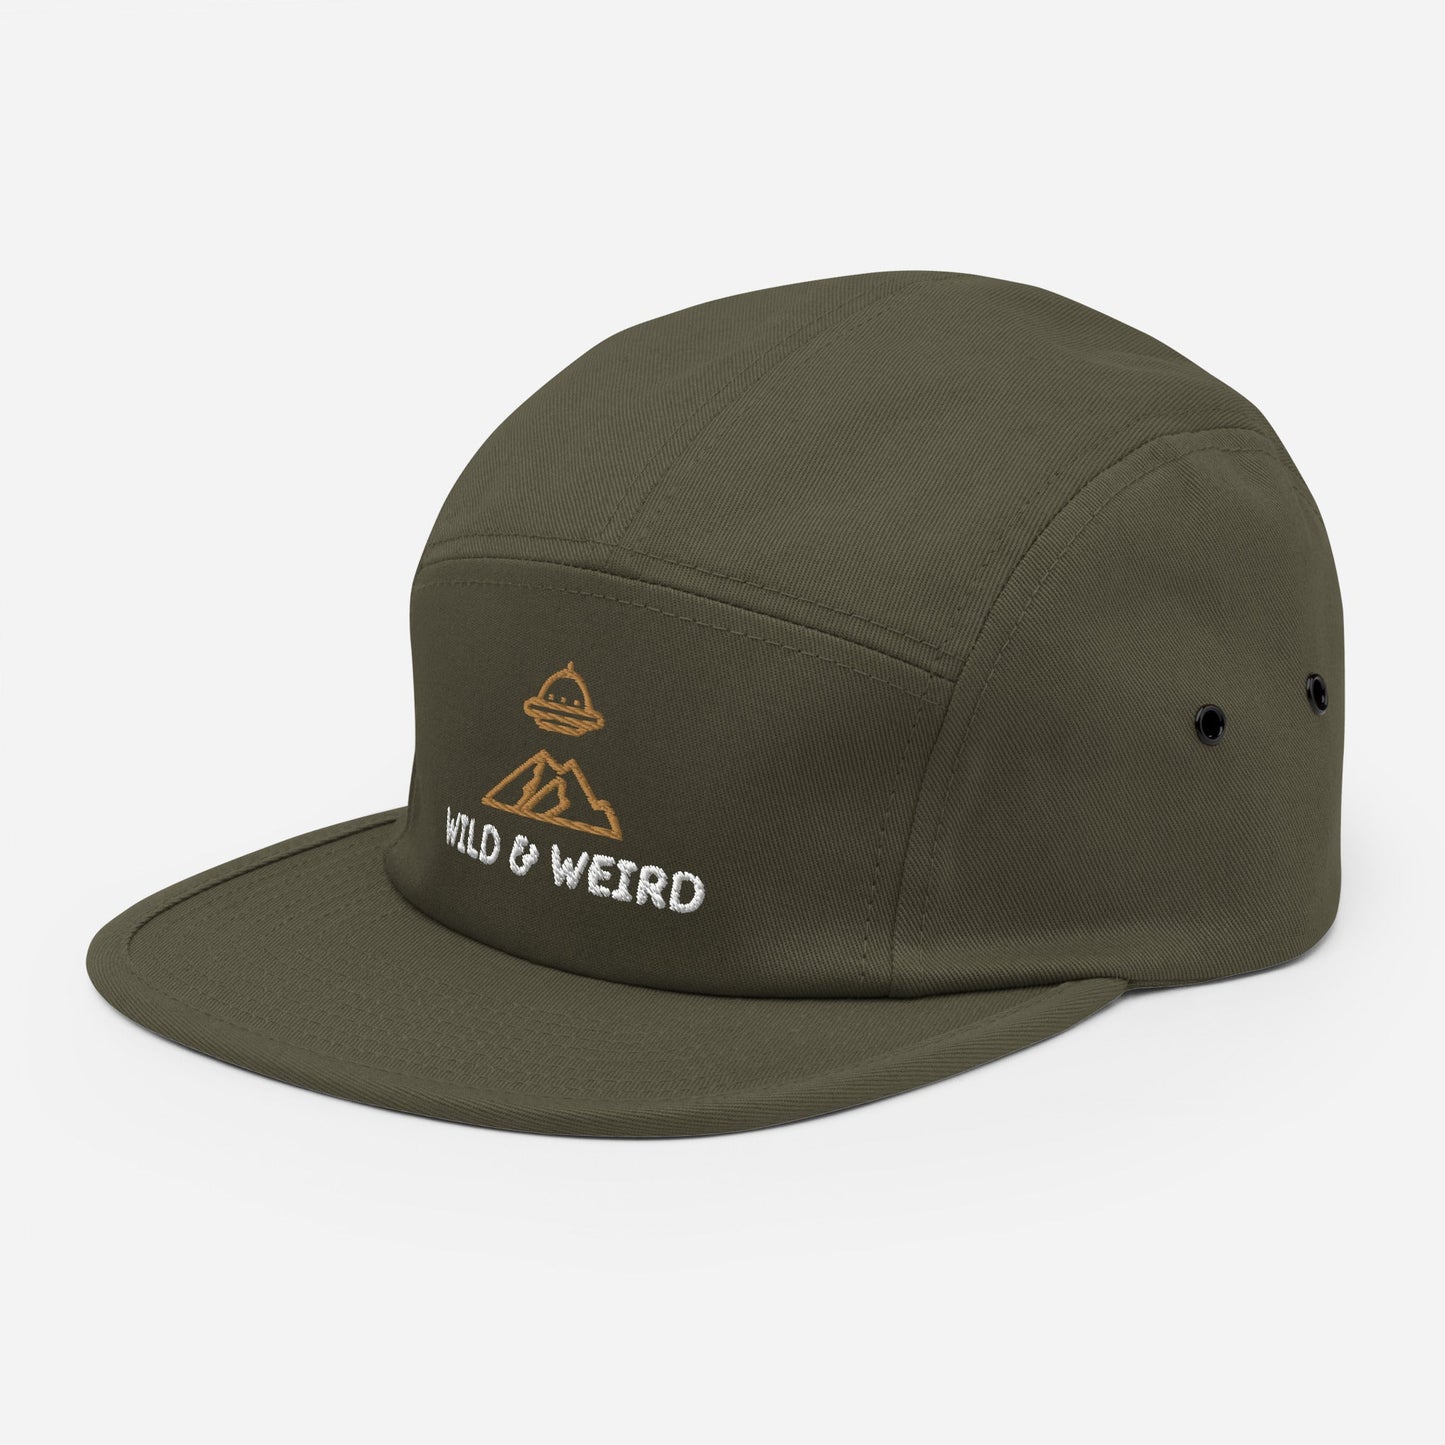 Wild and Weird Embroidered Five Panel Camper Cap - Appalachian Bittersweet - 5 panel camper